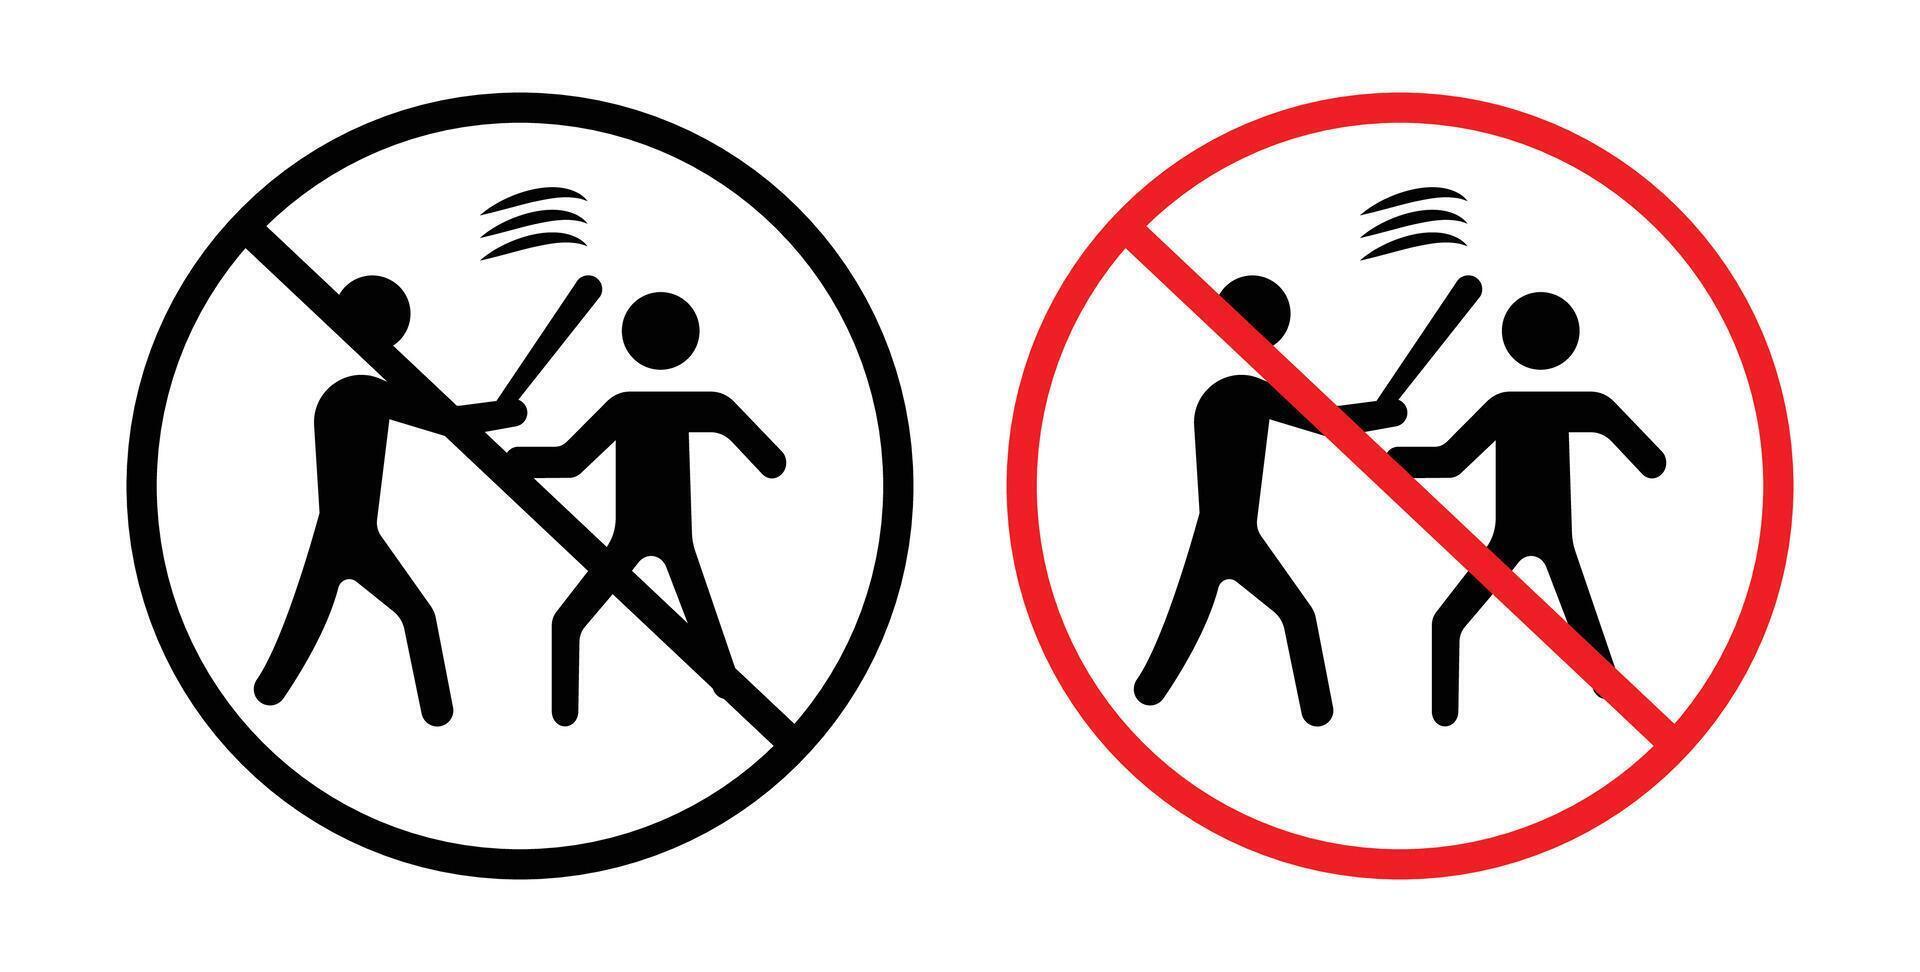 No fight sign vector